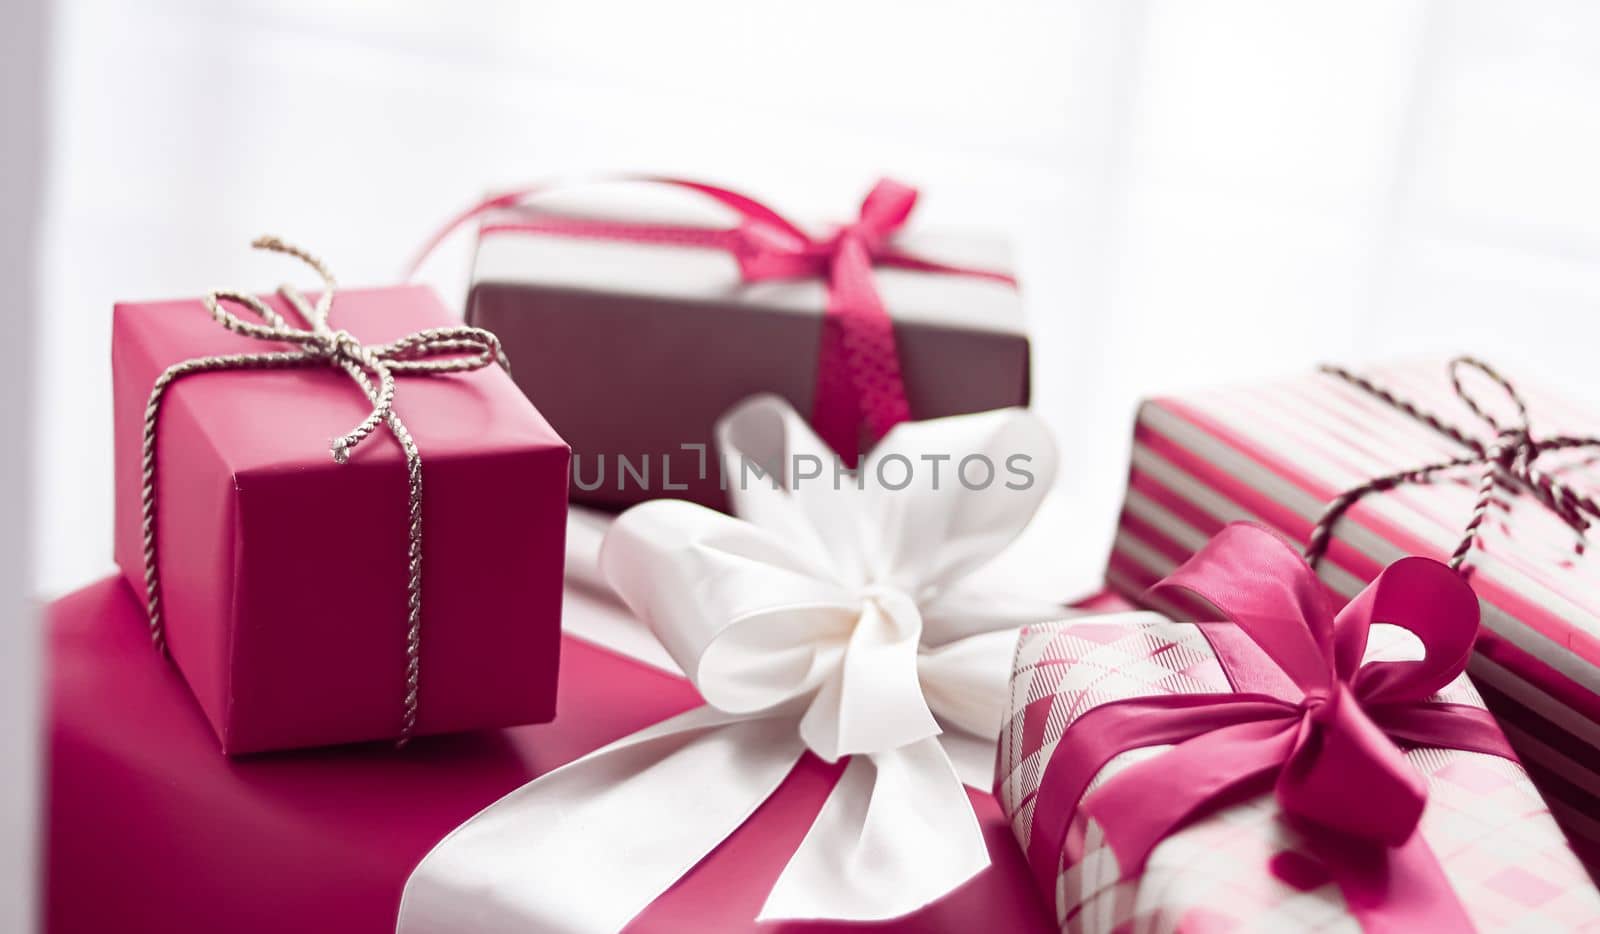 Holiday gifts and wrapped luxury presents, pink gift boxes as surprise present for birthday, Christmas, New Year, Valentines Day, boxing day, wedding and holidays shopping or beauty box delivery concept